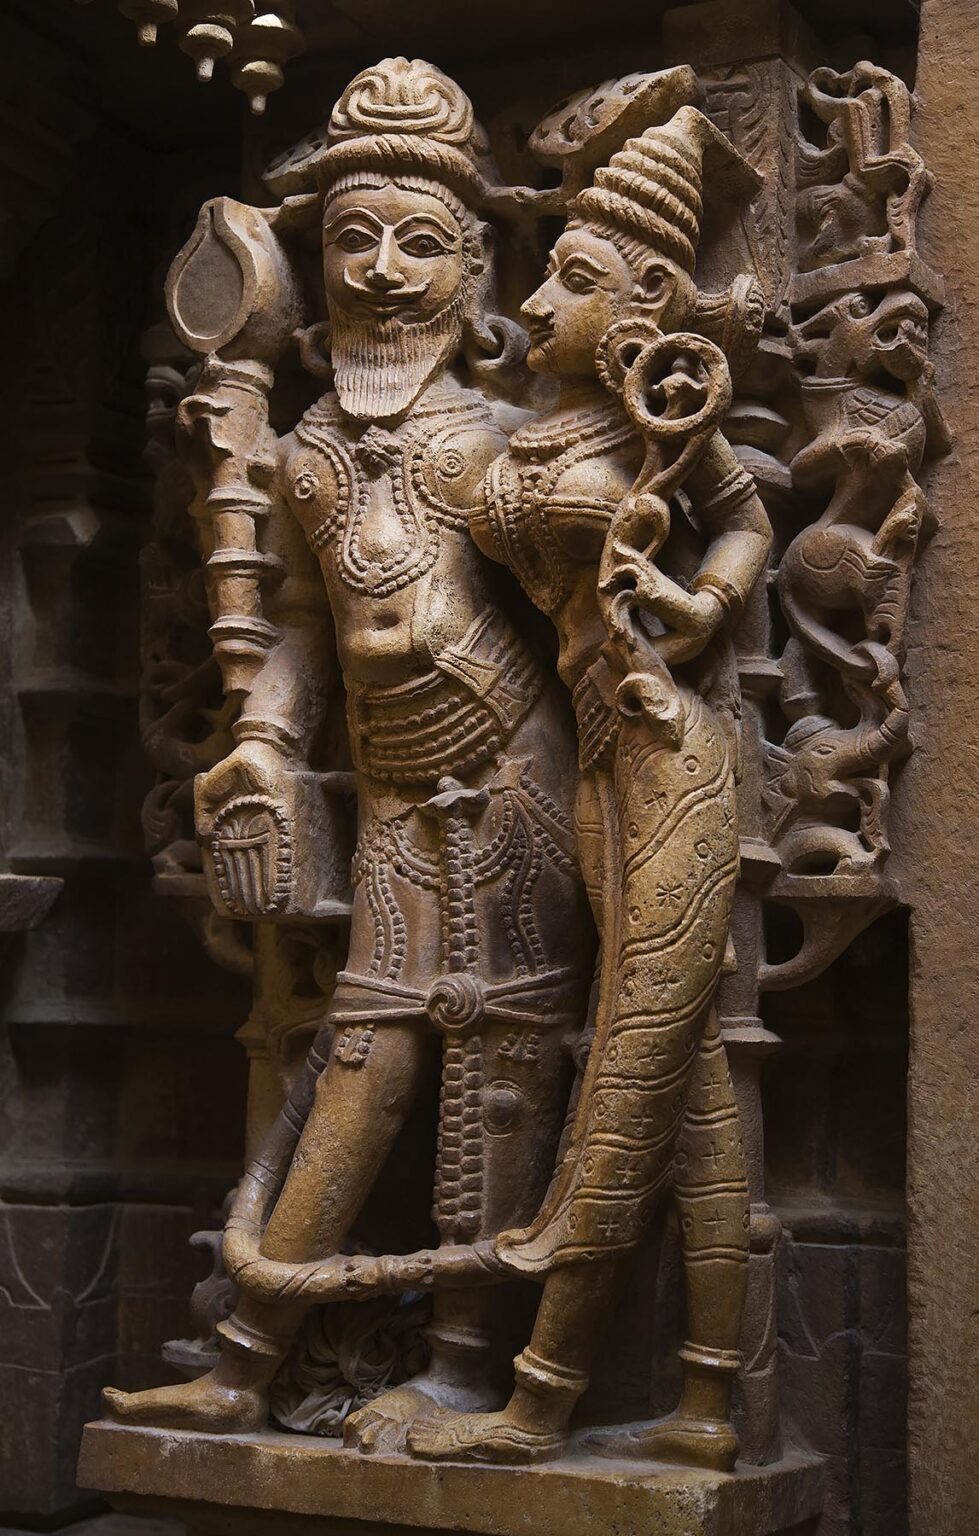 A hand carved SANDSTONE KING and his CONSORT in the  CHANDRAPRABHU JAIN TEMPLE inside JAISALMER FORT - RAJASTHAN, INDIA